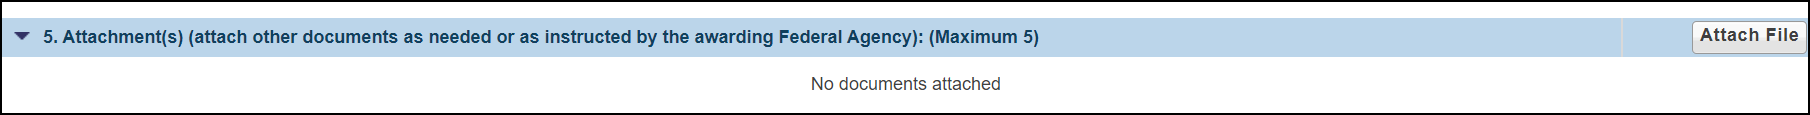 Attachments section where documents are added